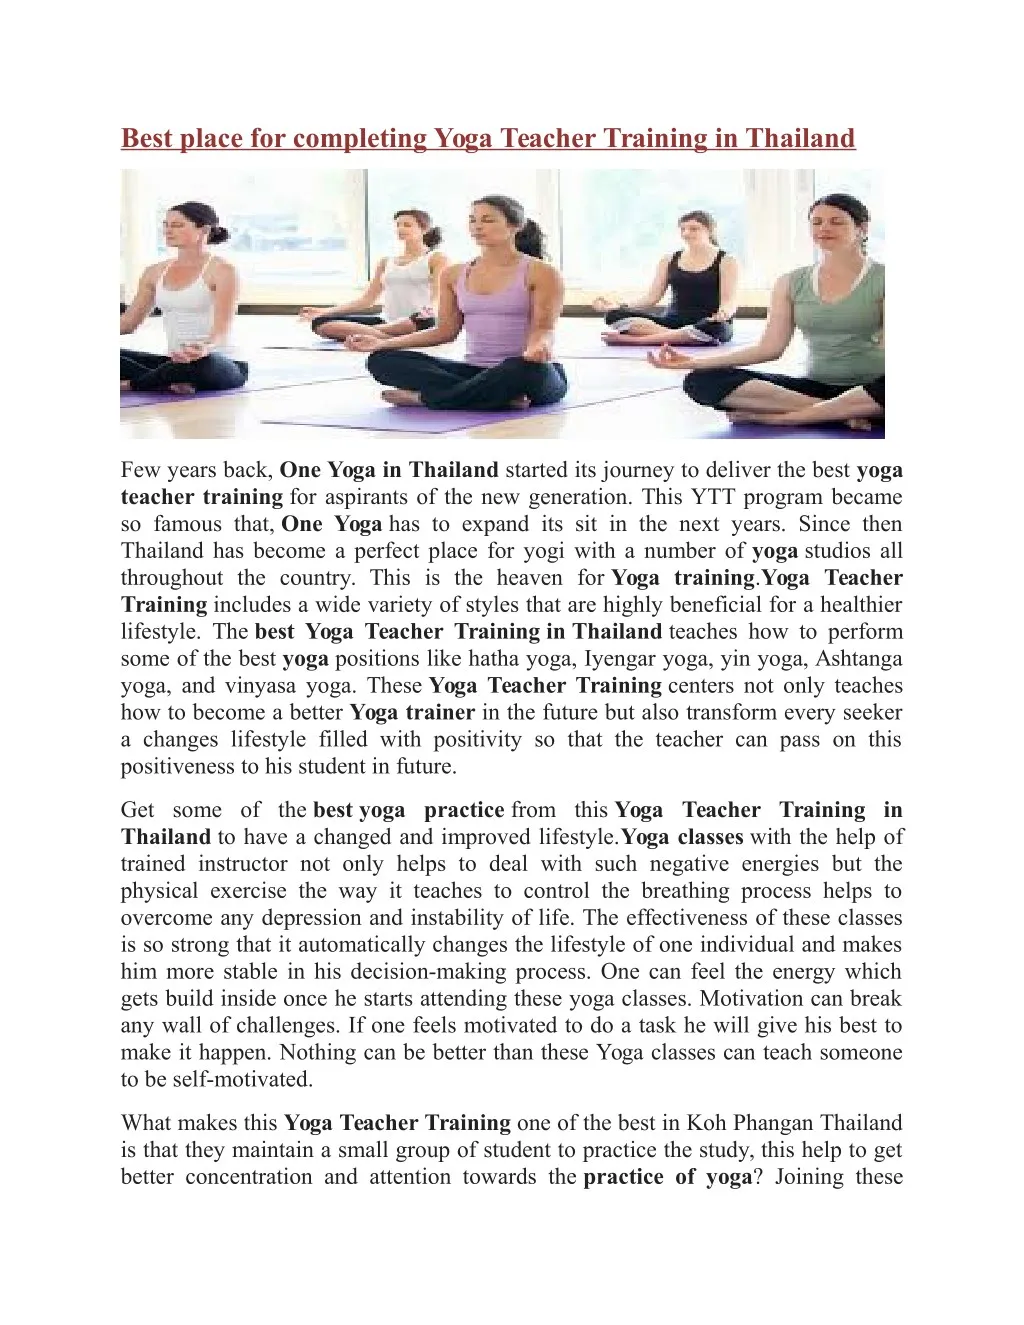 best place for completing yoga teacher training